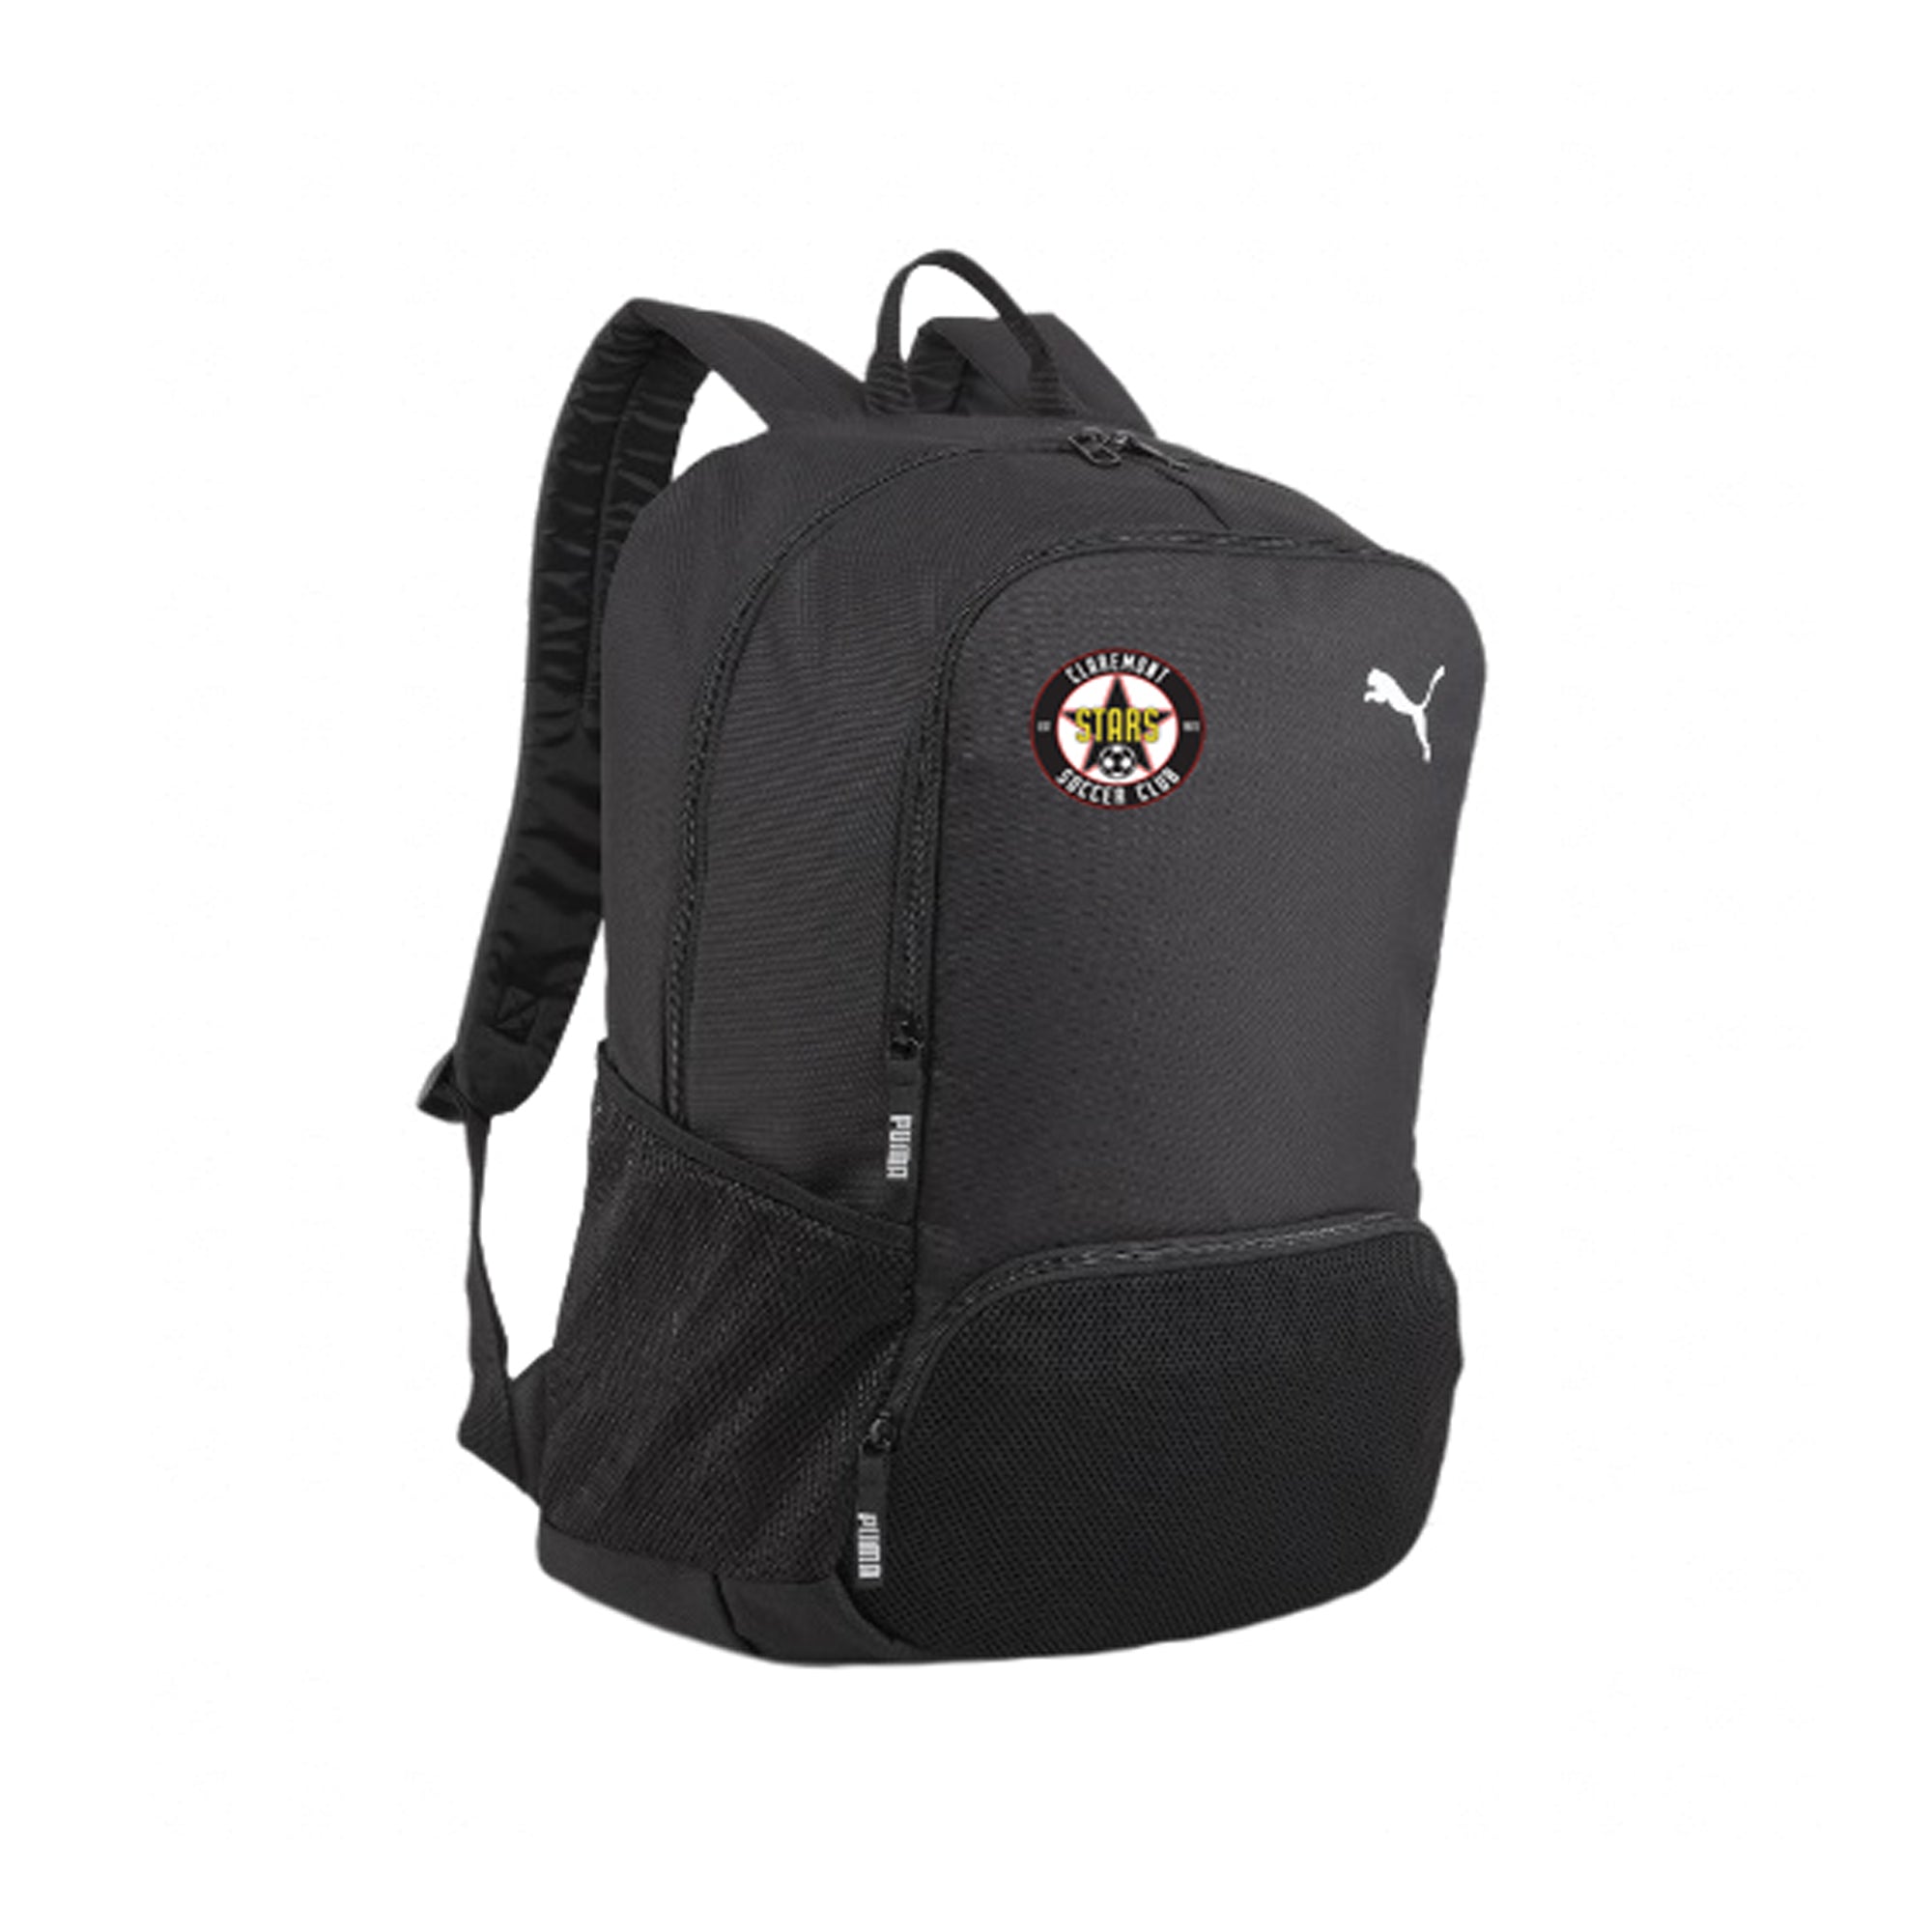 CLAREMONT STARS BACKPACK - PUMA TEAM GOAL WITH CREST